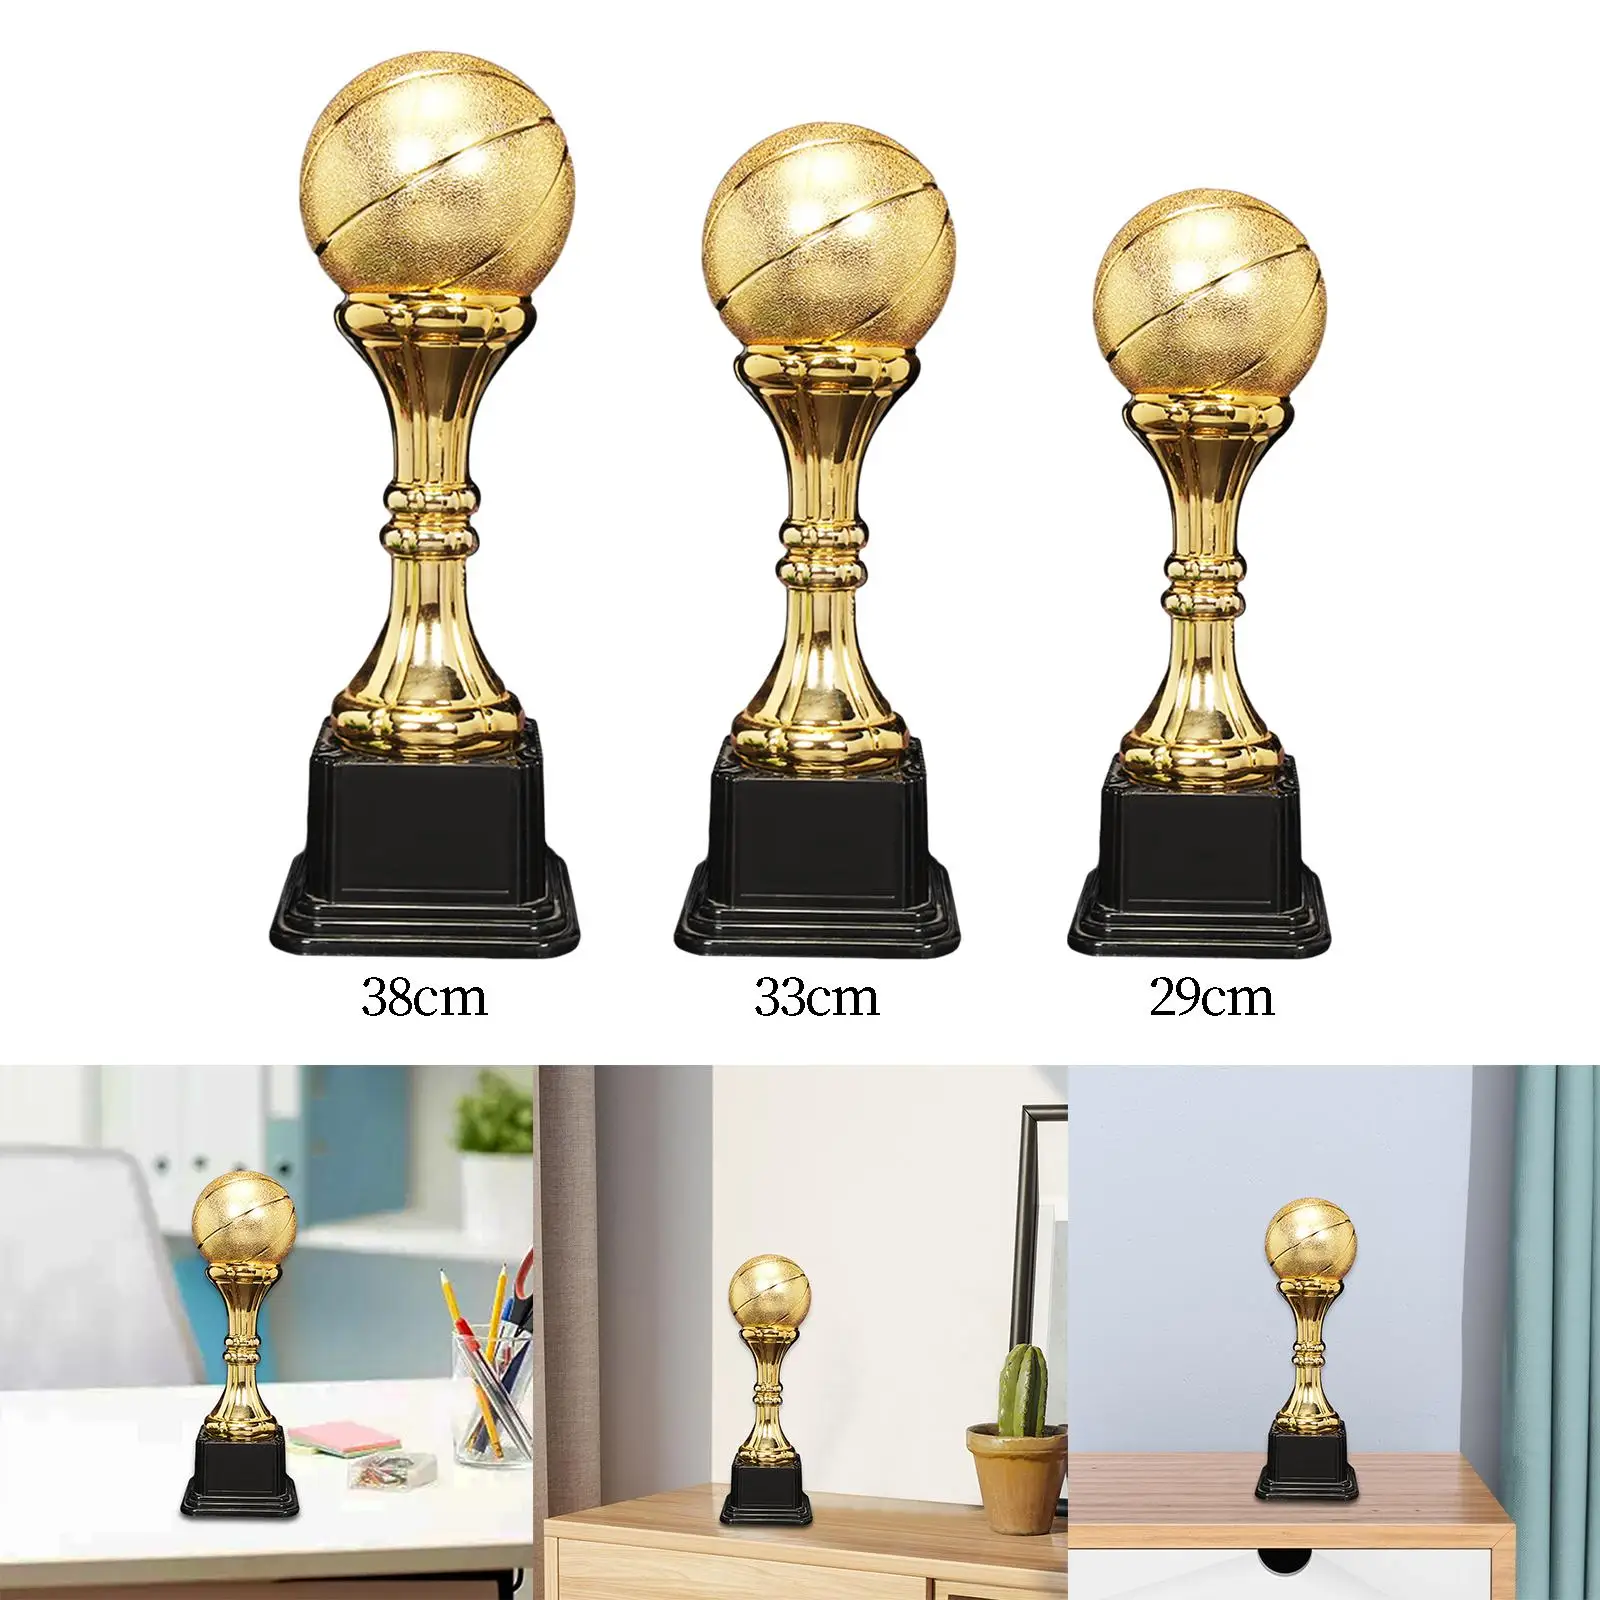 Kids PP Basketball Trophy Cups Award Trophies Cup Multifunctional Smooth Surface Decorative Rewards Prizes for Birthdays